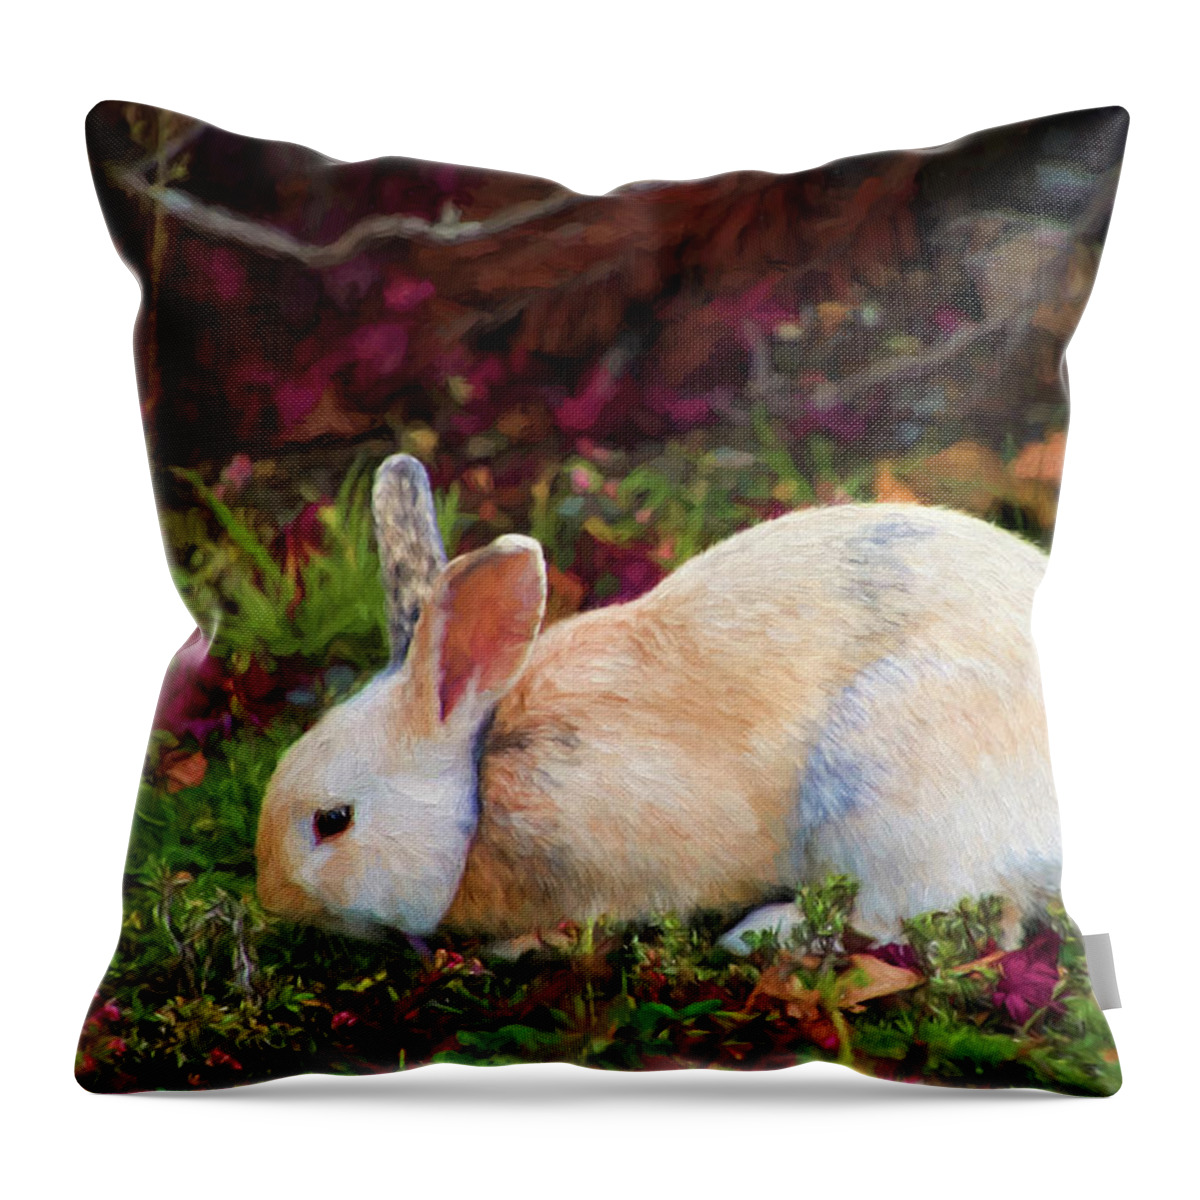 White Rabbit Throw Pillow featuring the photograph Wild White Bunny by Peggy Collins